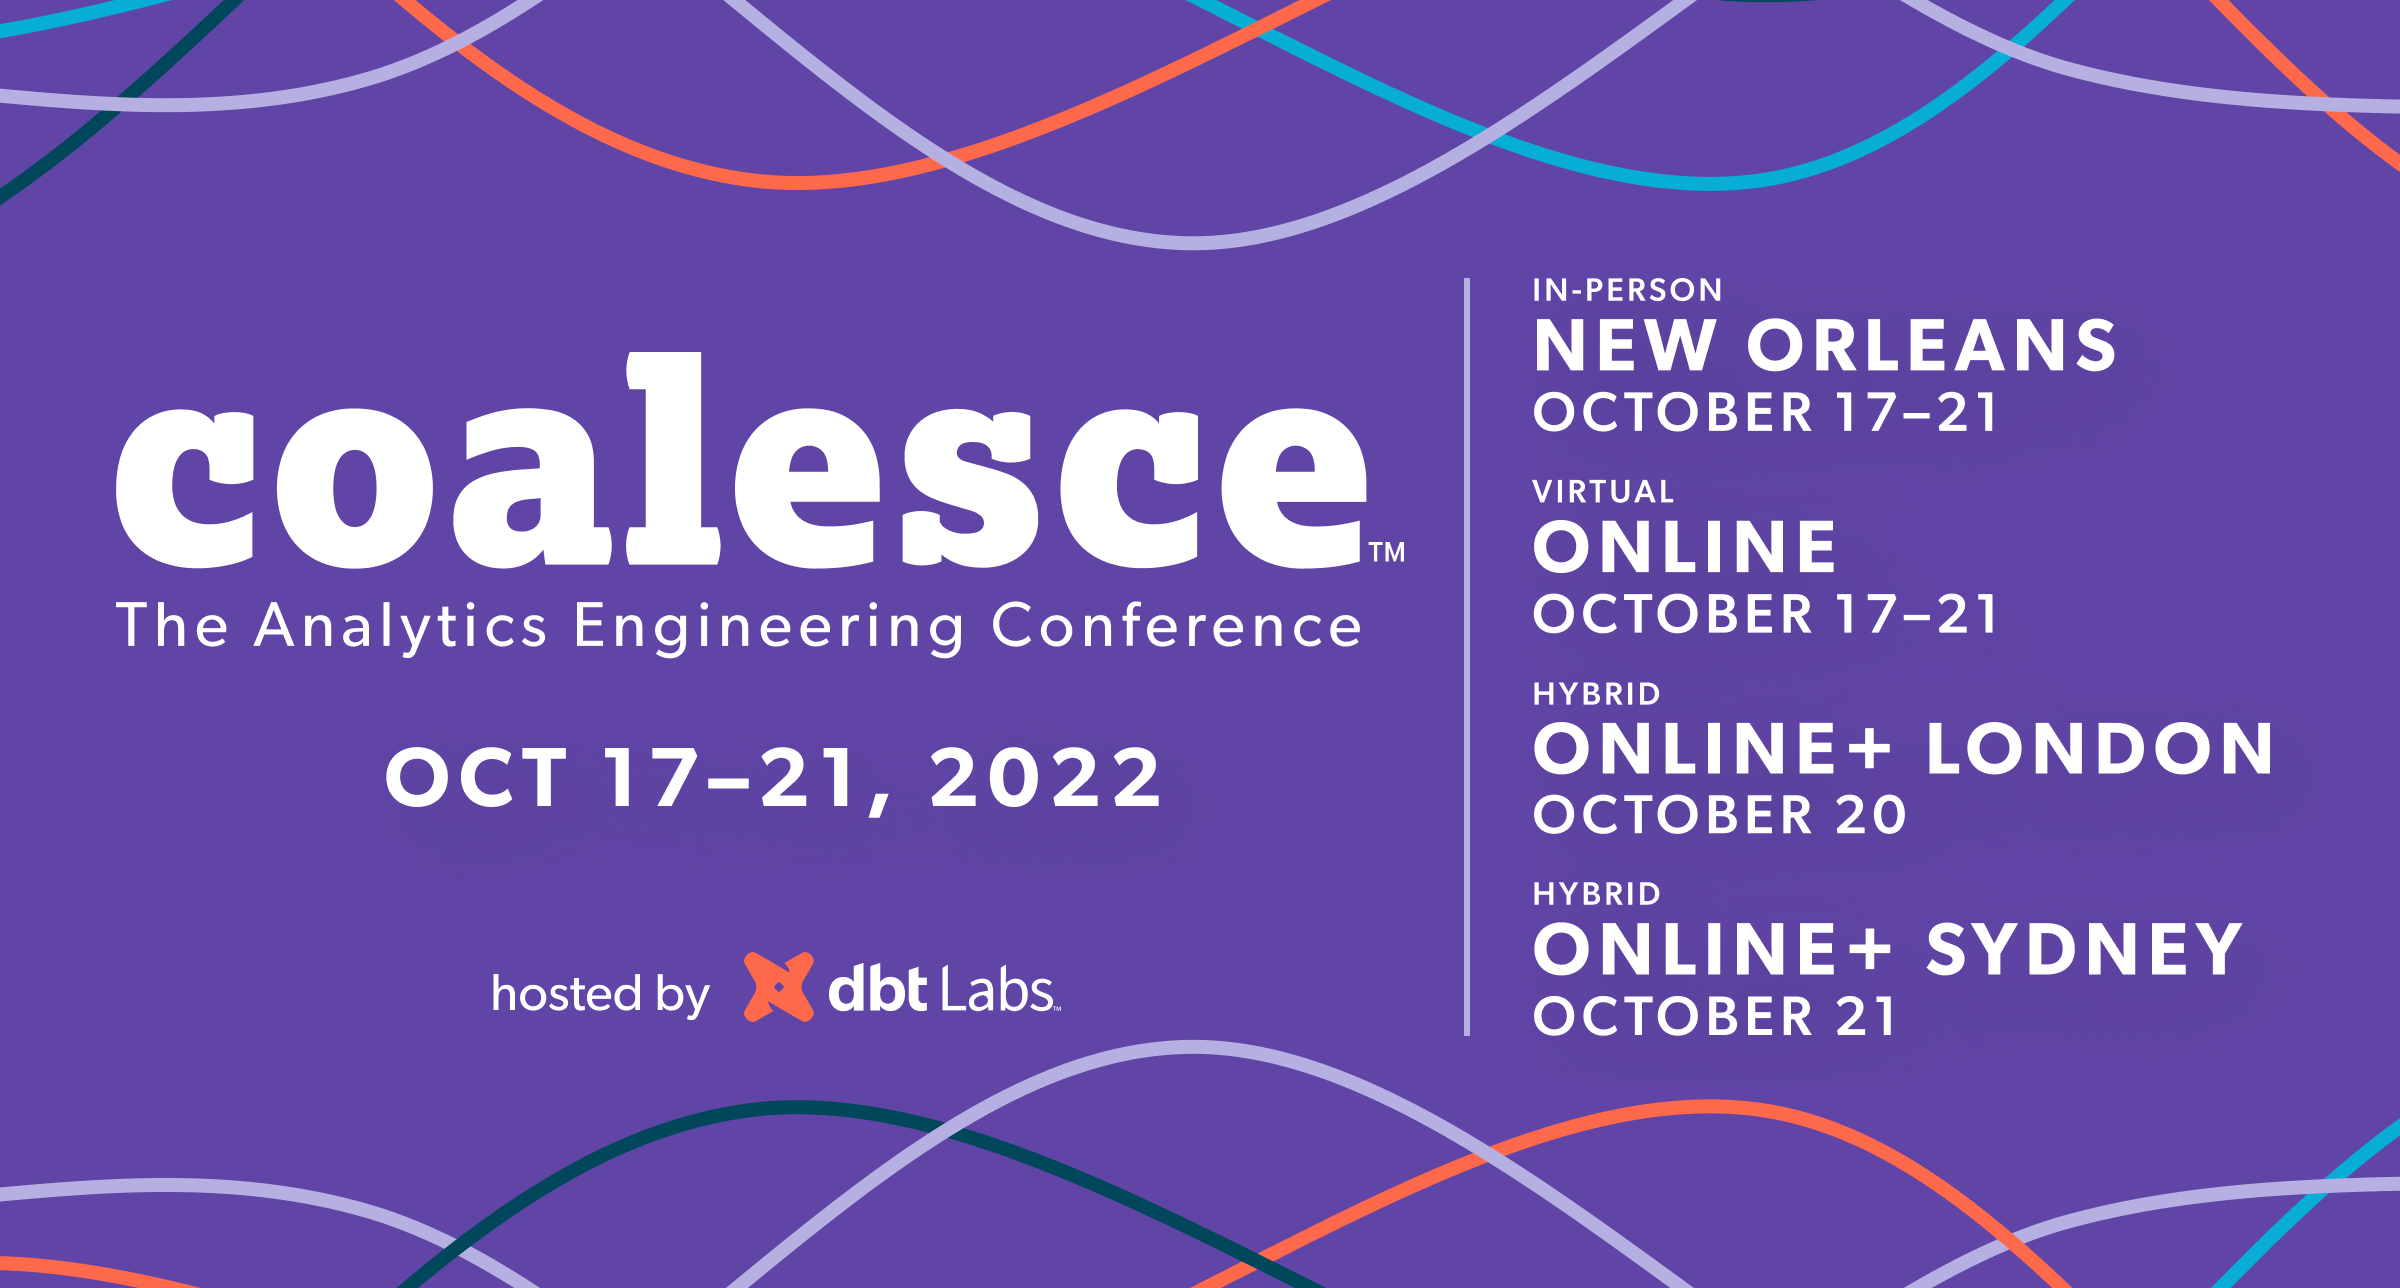 Coalesce 2022 - The Analytics Engineering Conference hosted by dbt Labs (Recap)